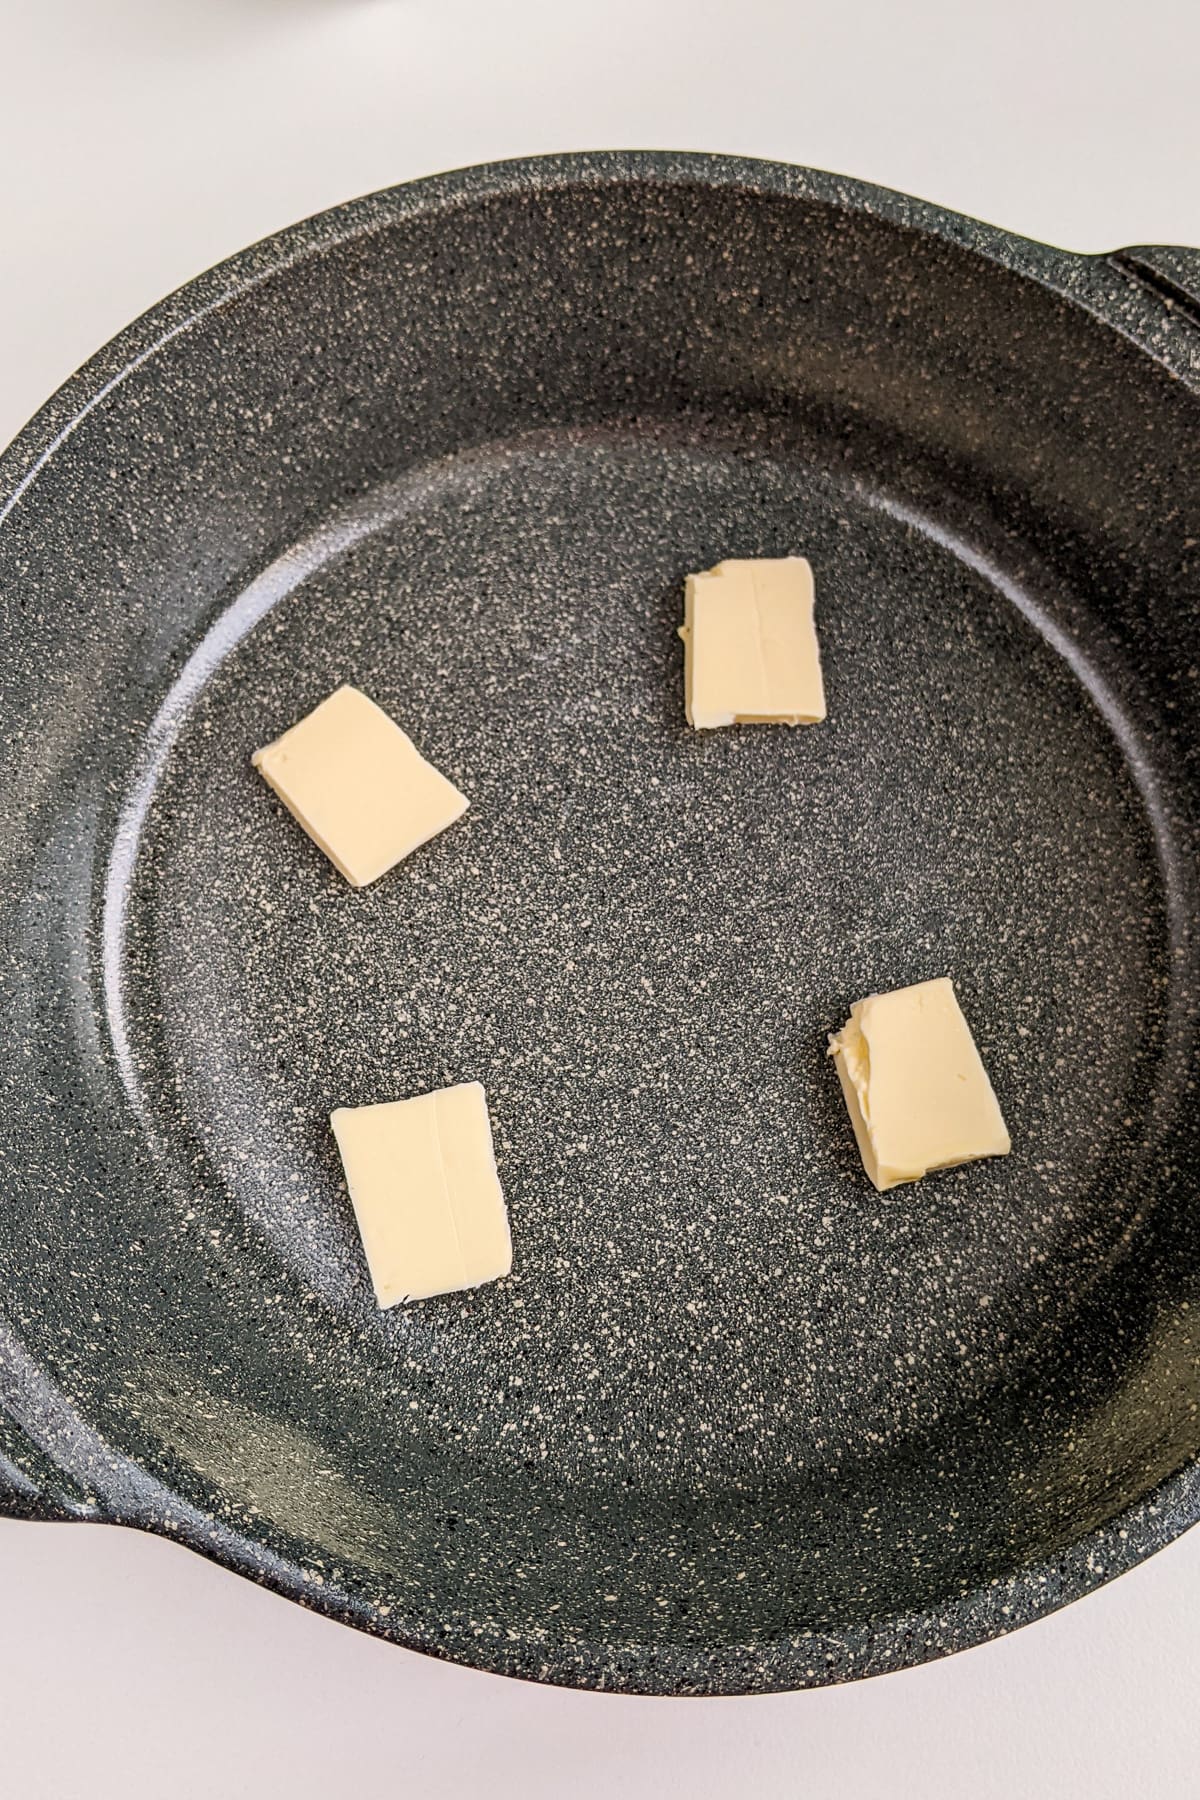 4 pieces of butter in a gray casserole on a white table.